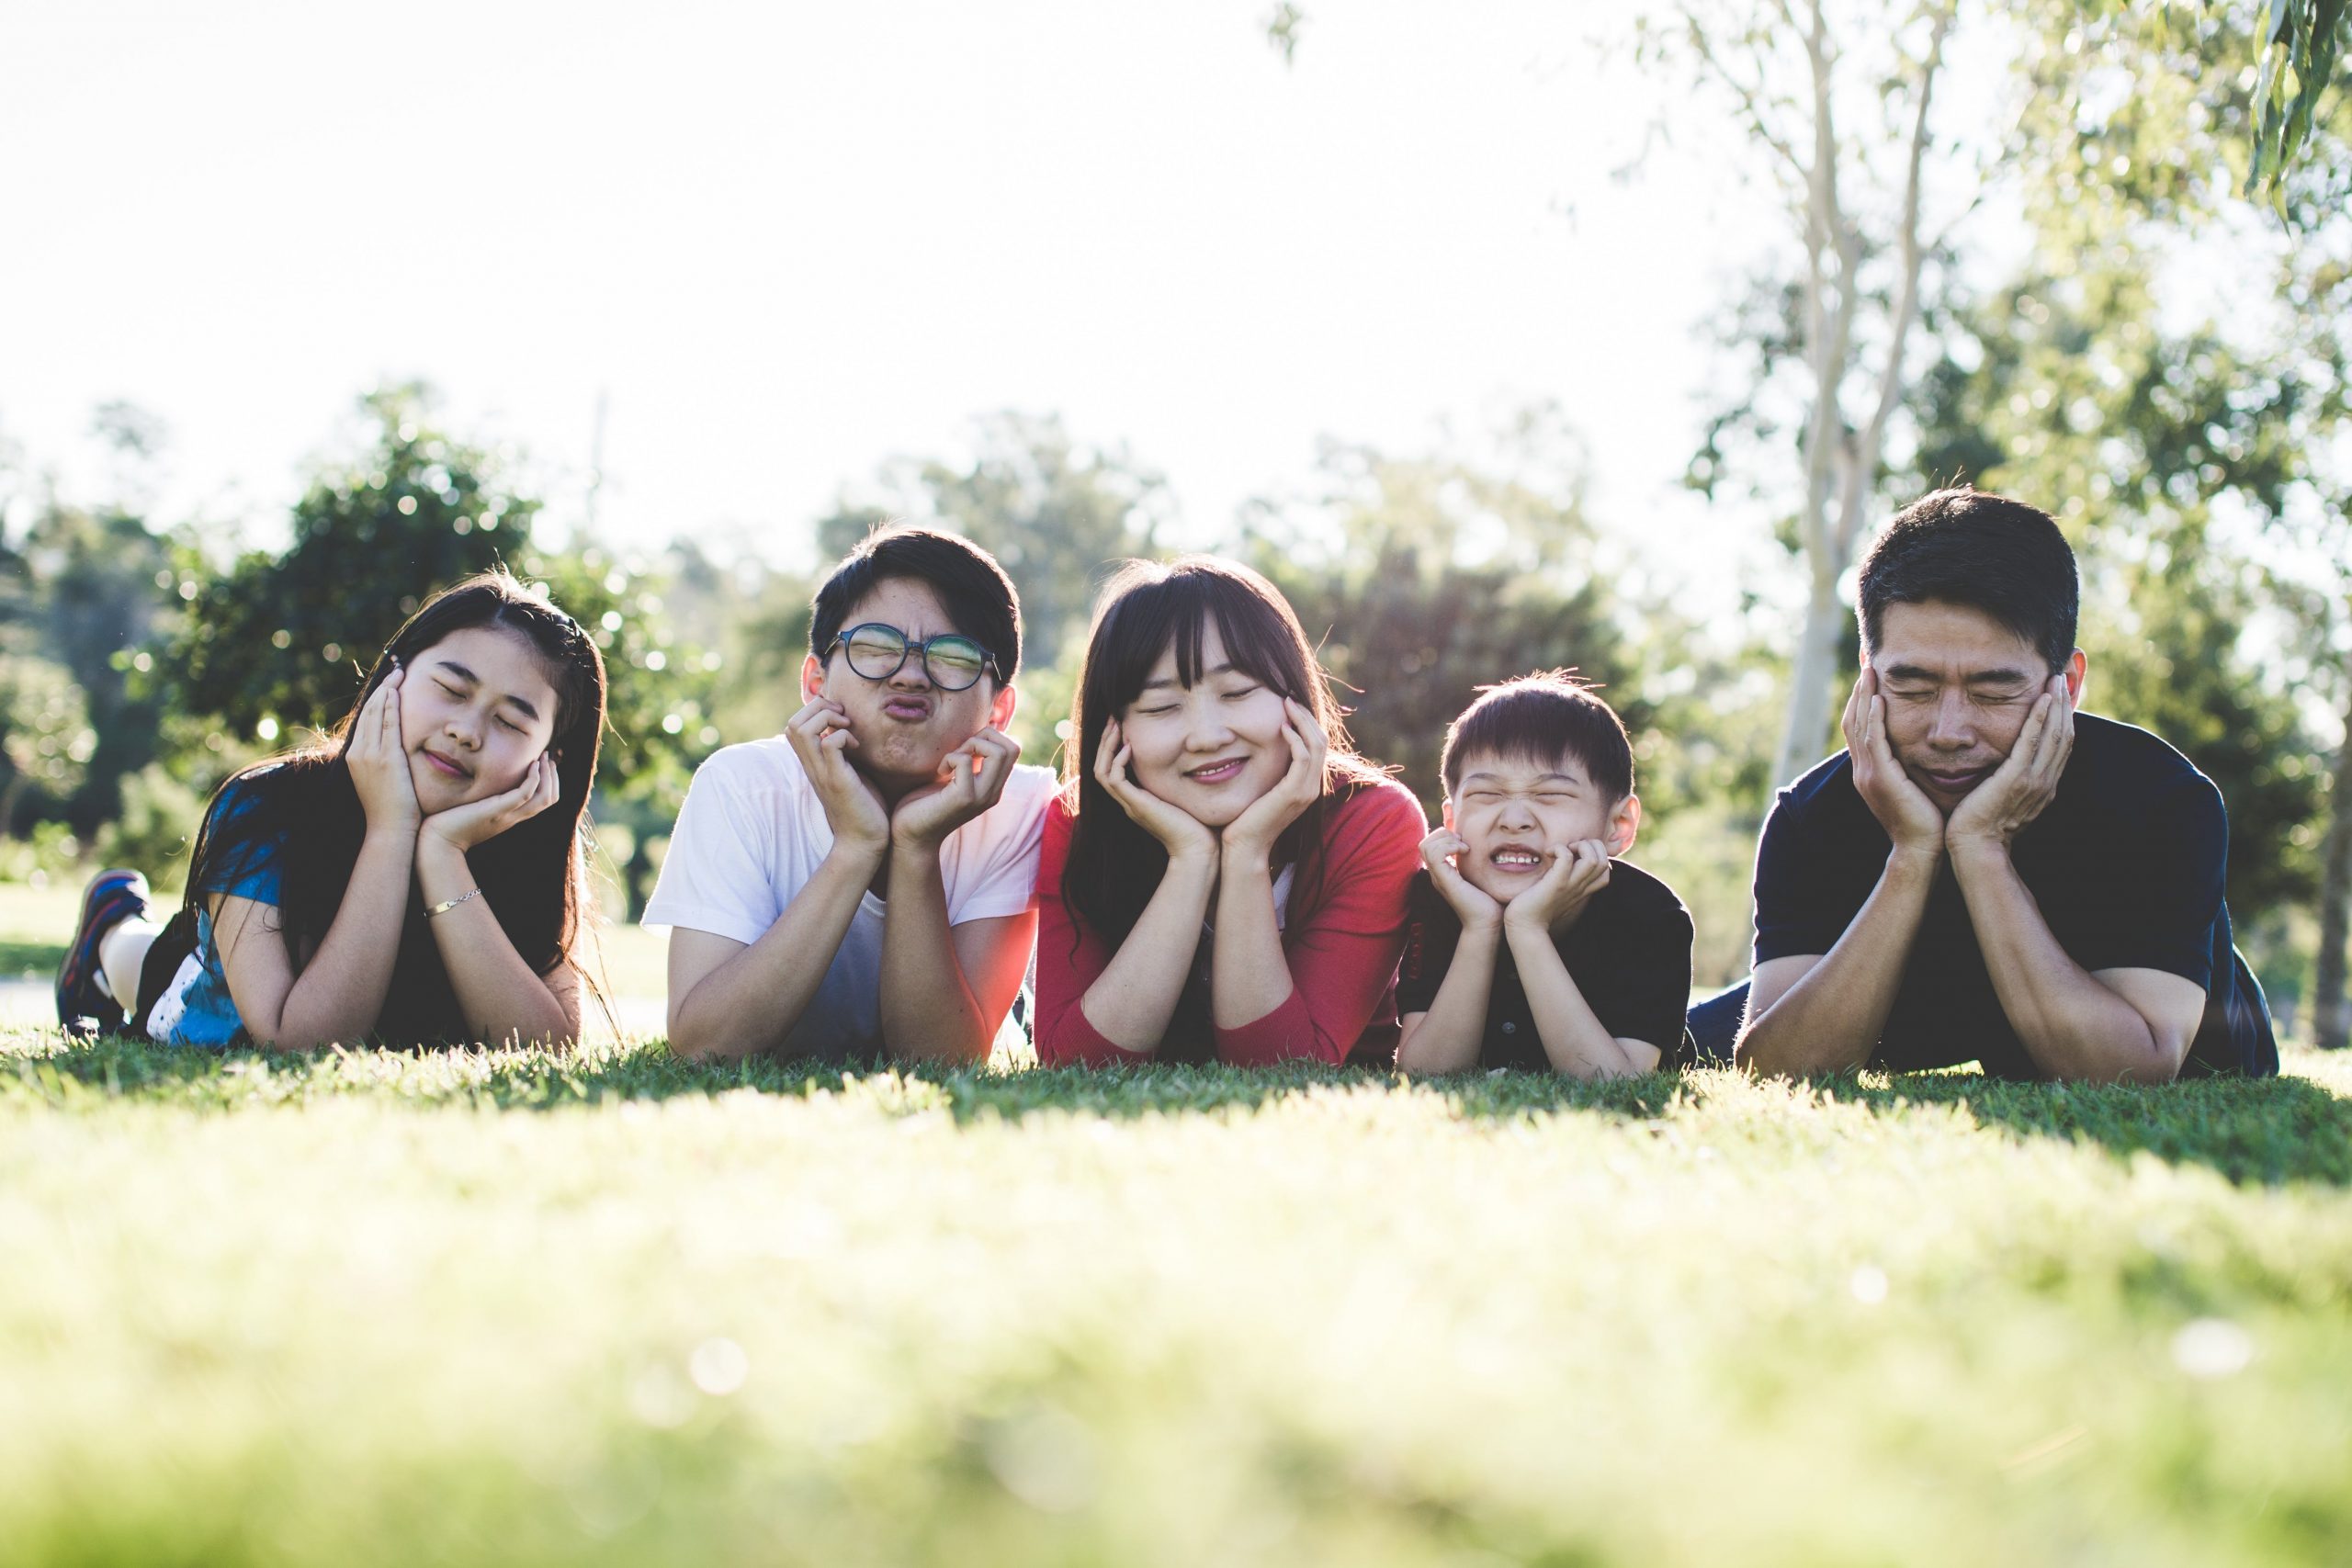 Family lying on grass in park, smiling with hands on cheeks, enjoying sunny day.